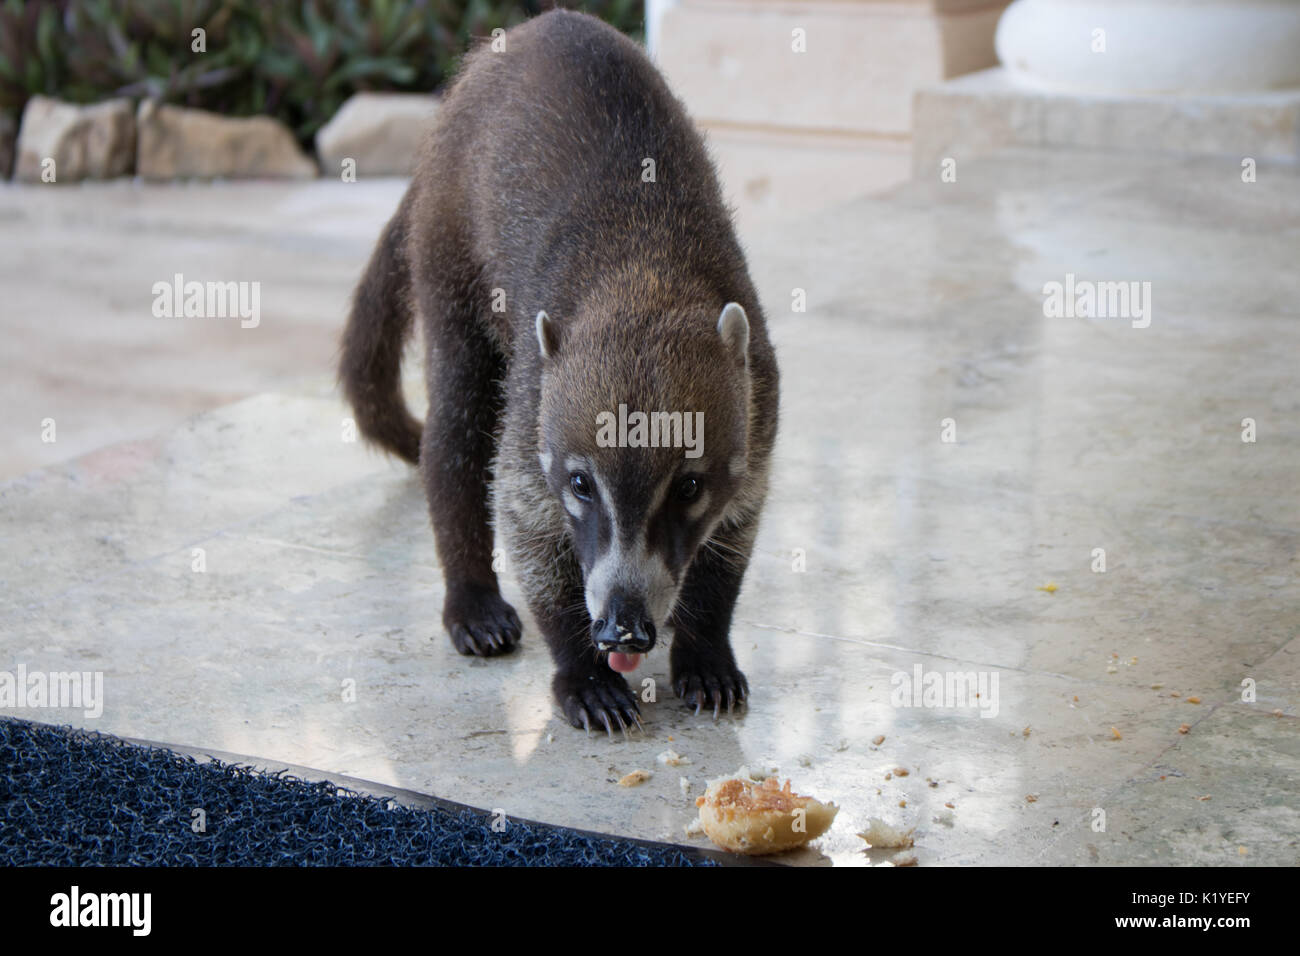 Coati on marble hotel floor eating a pastry Stock Photo